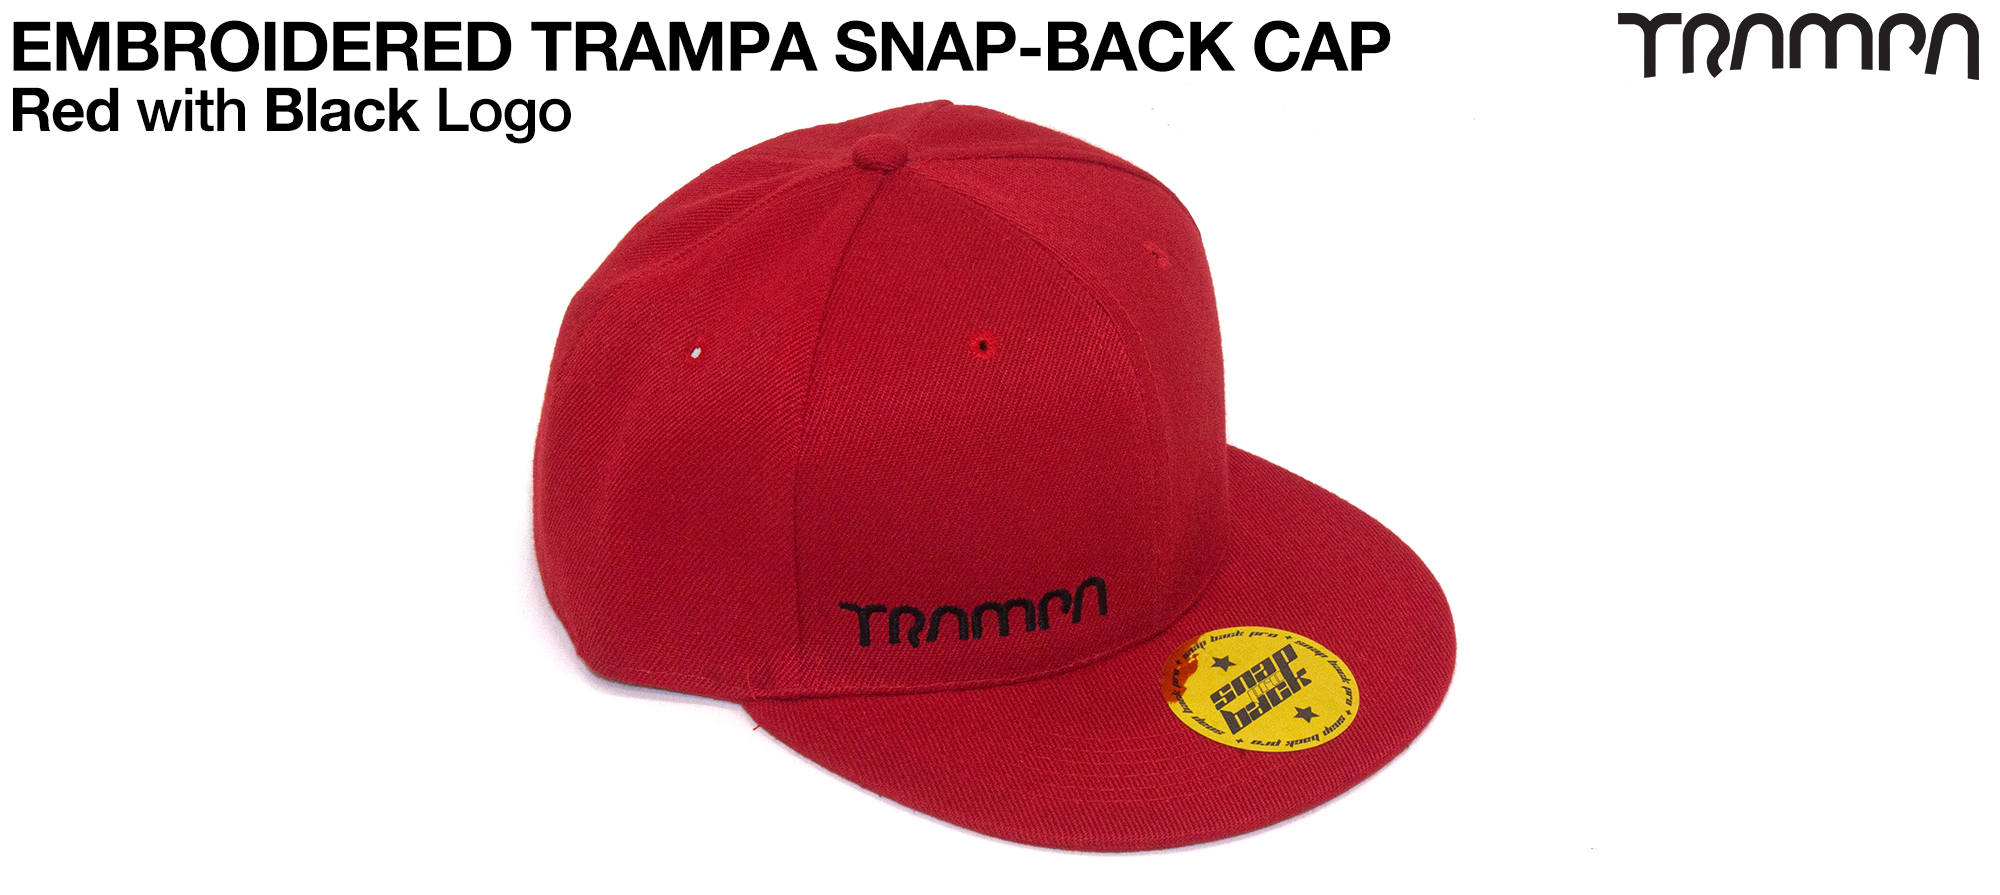 RED SNAPBACK Cap with BLACK embroidered TRAMPA logo 